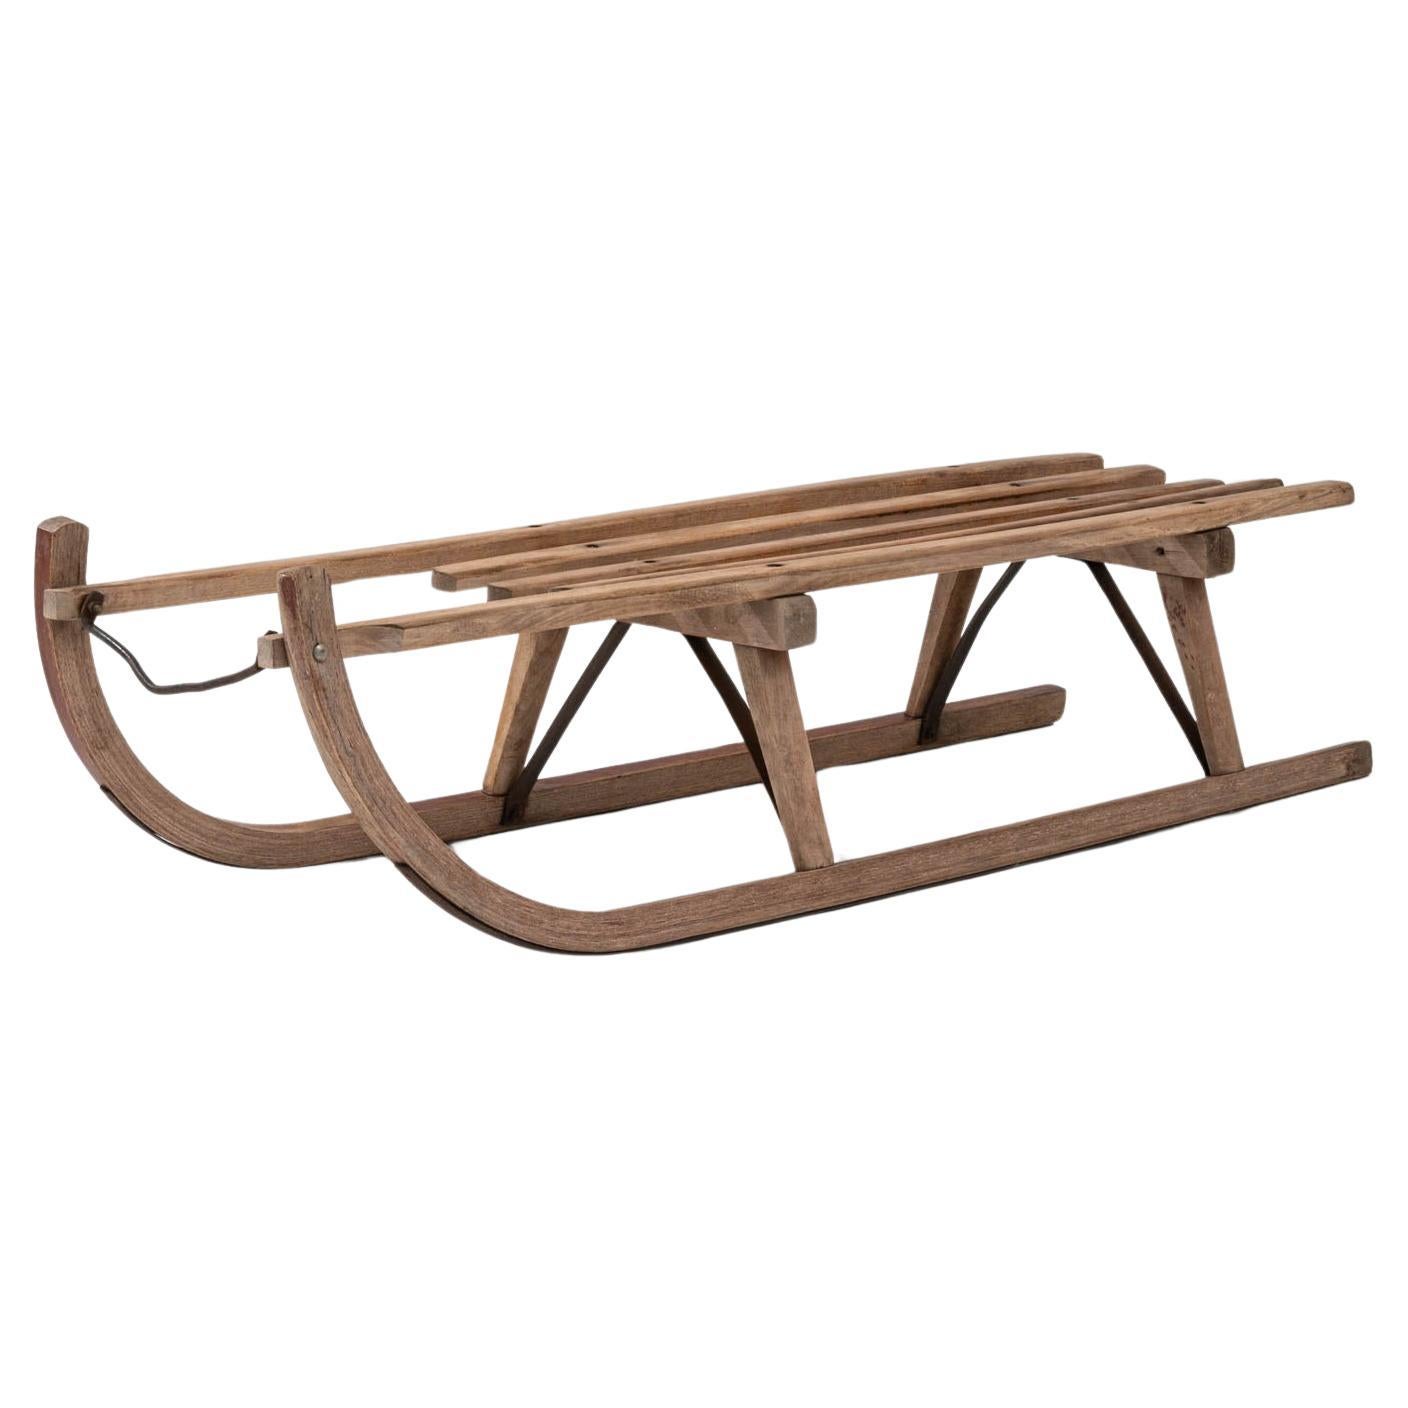 How much is an old wooden sled worth?